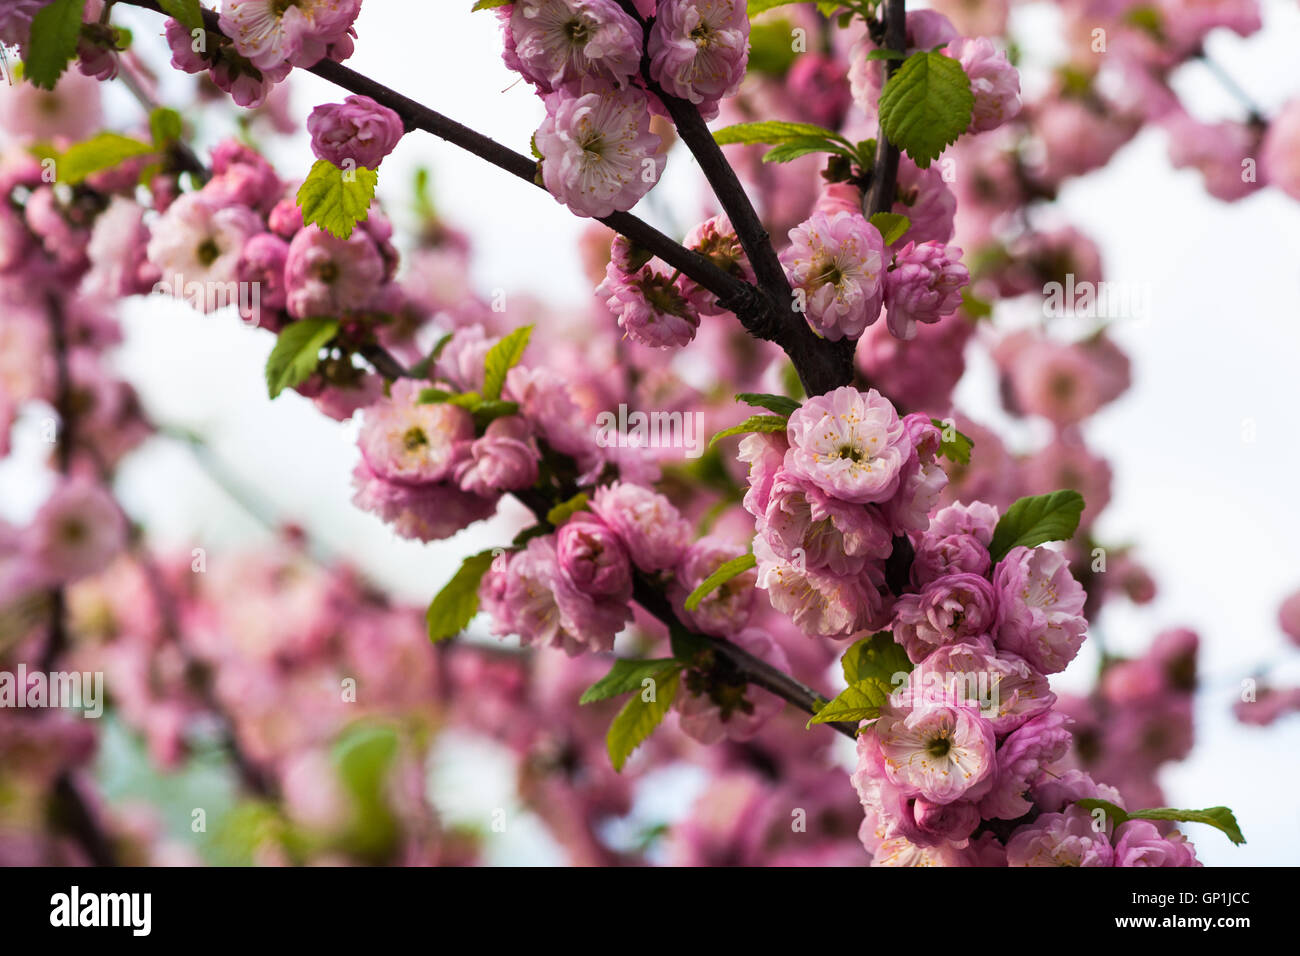 Flowering almond tree also known as prunus triloba in full bloom. Pink flowers, pale background, spring theme. Stock Photo